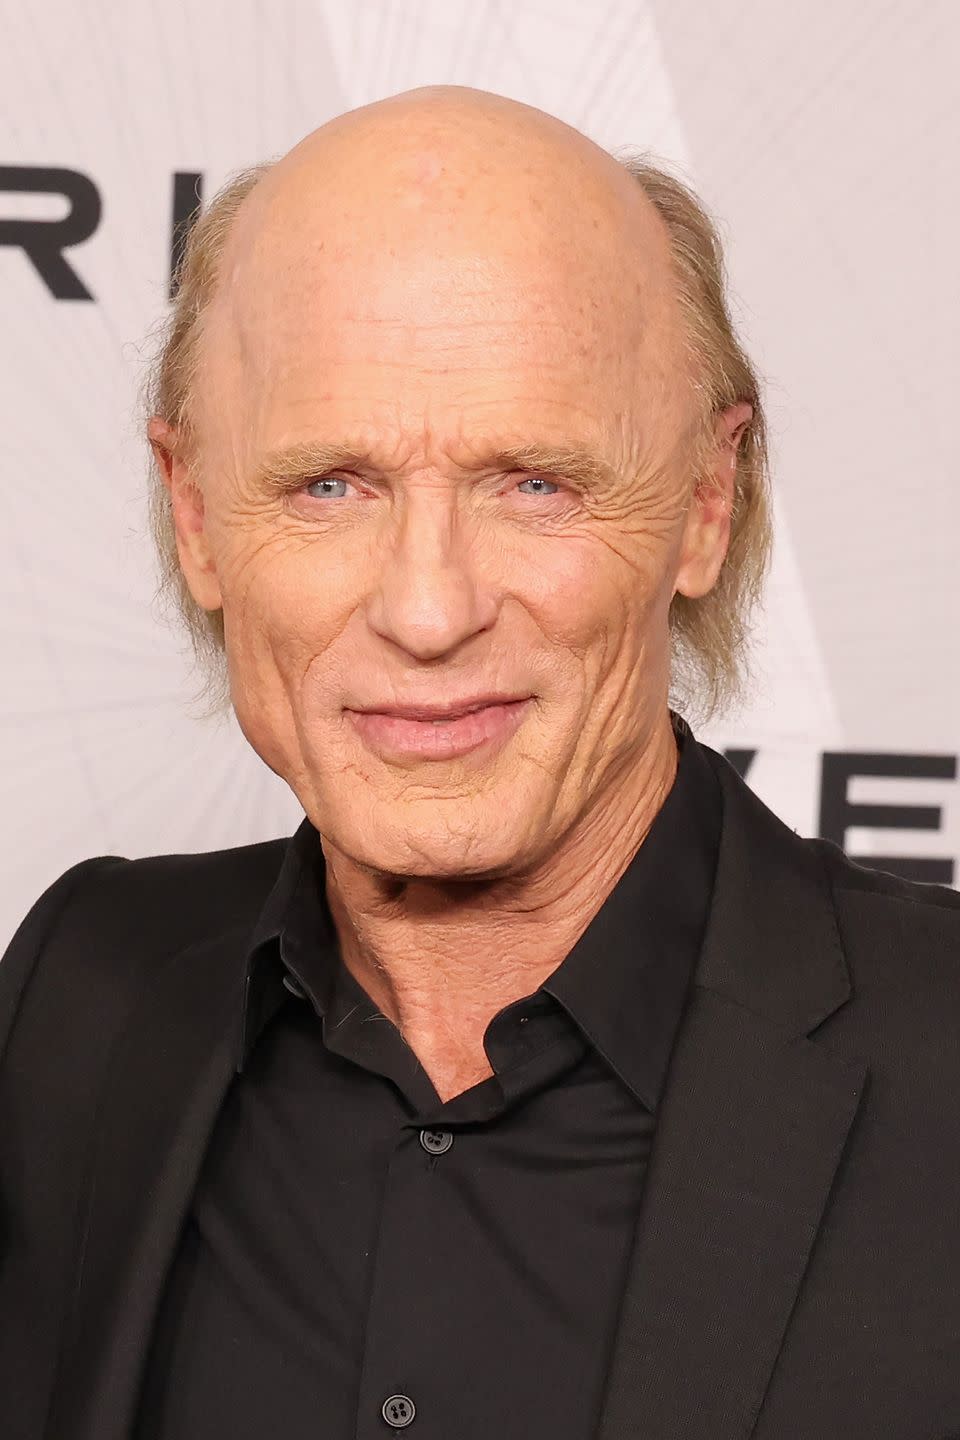 new york, new york june 21 ed harris attends the premiere of hbos westworld season 4 at alice tully hall, lincoln center on june 21, 2022 in new york city photo by taylor hillgetty images